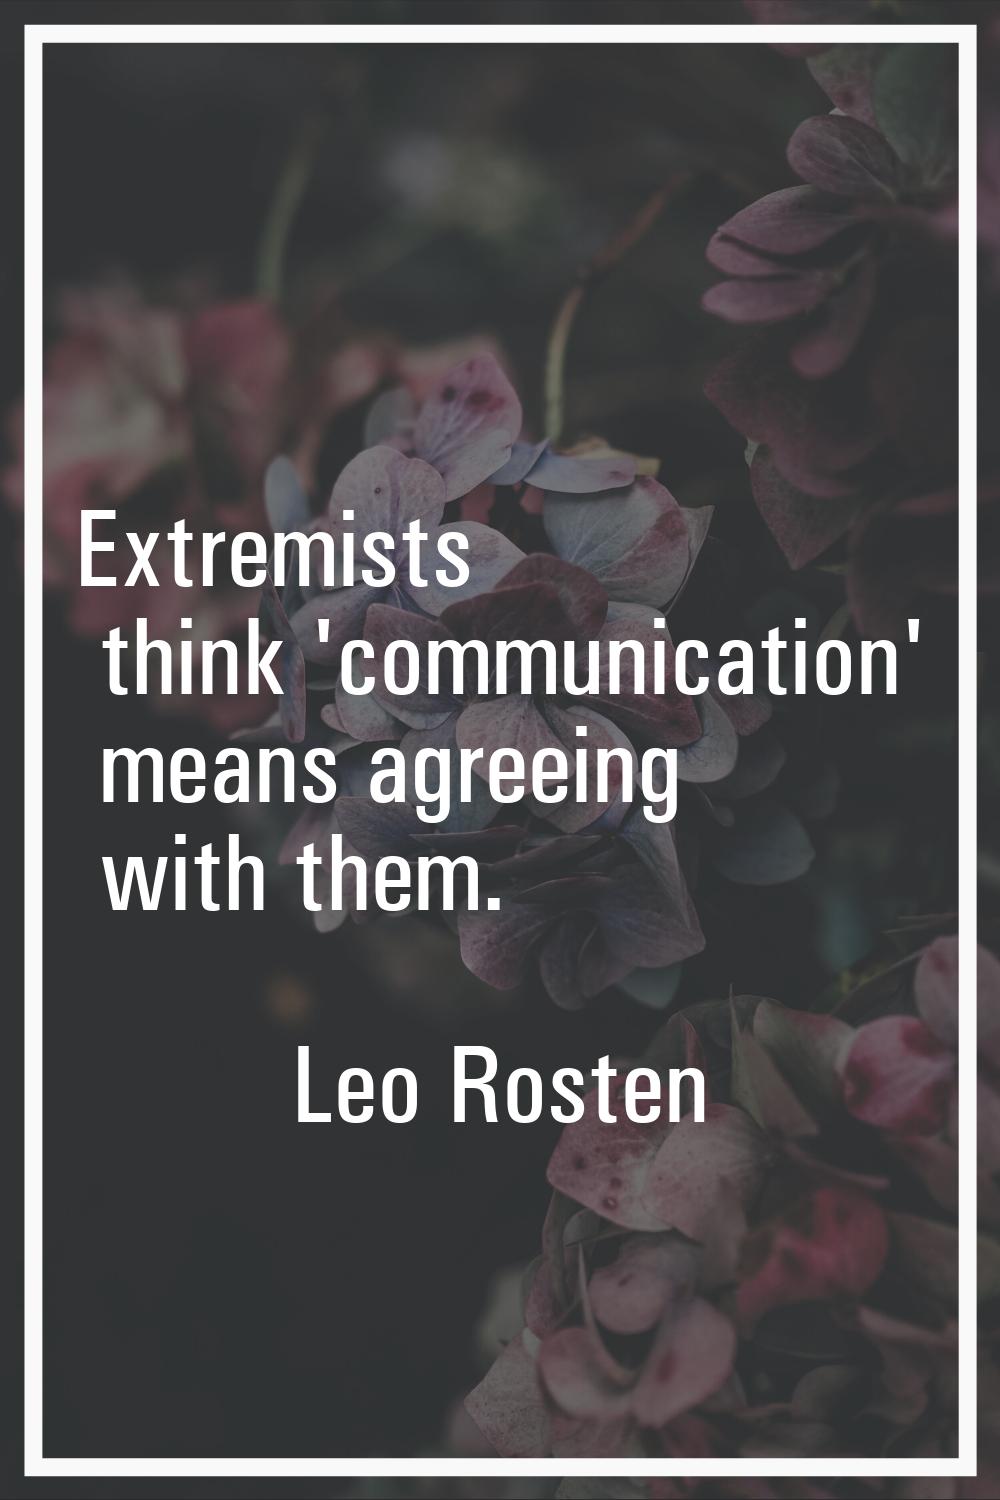 Extremists think 'communication' means agreeing with them.